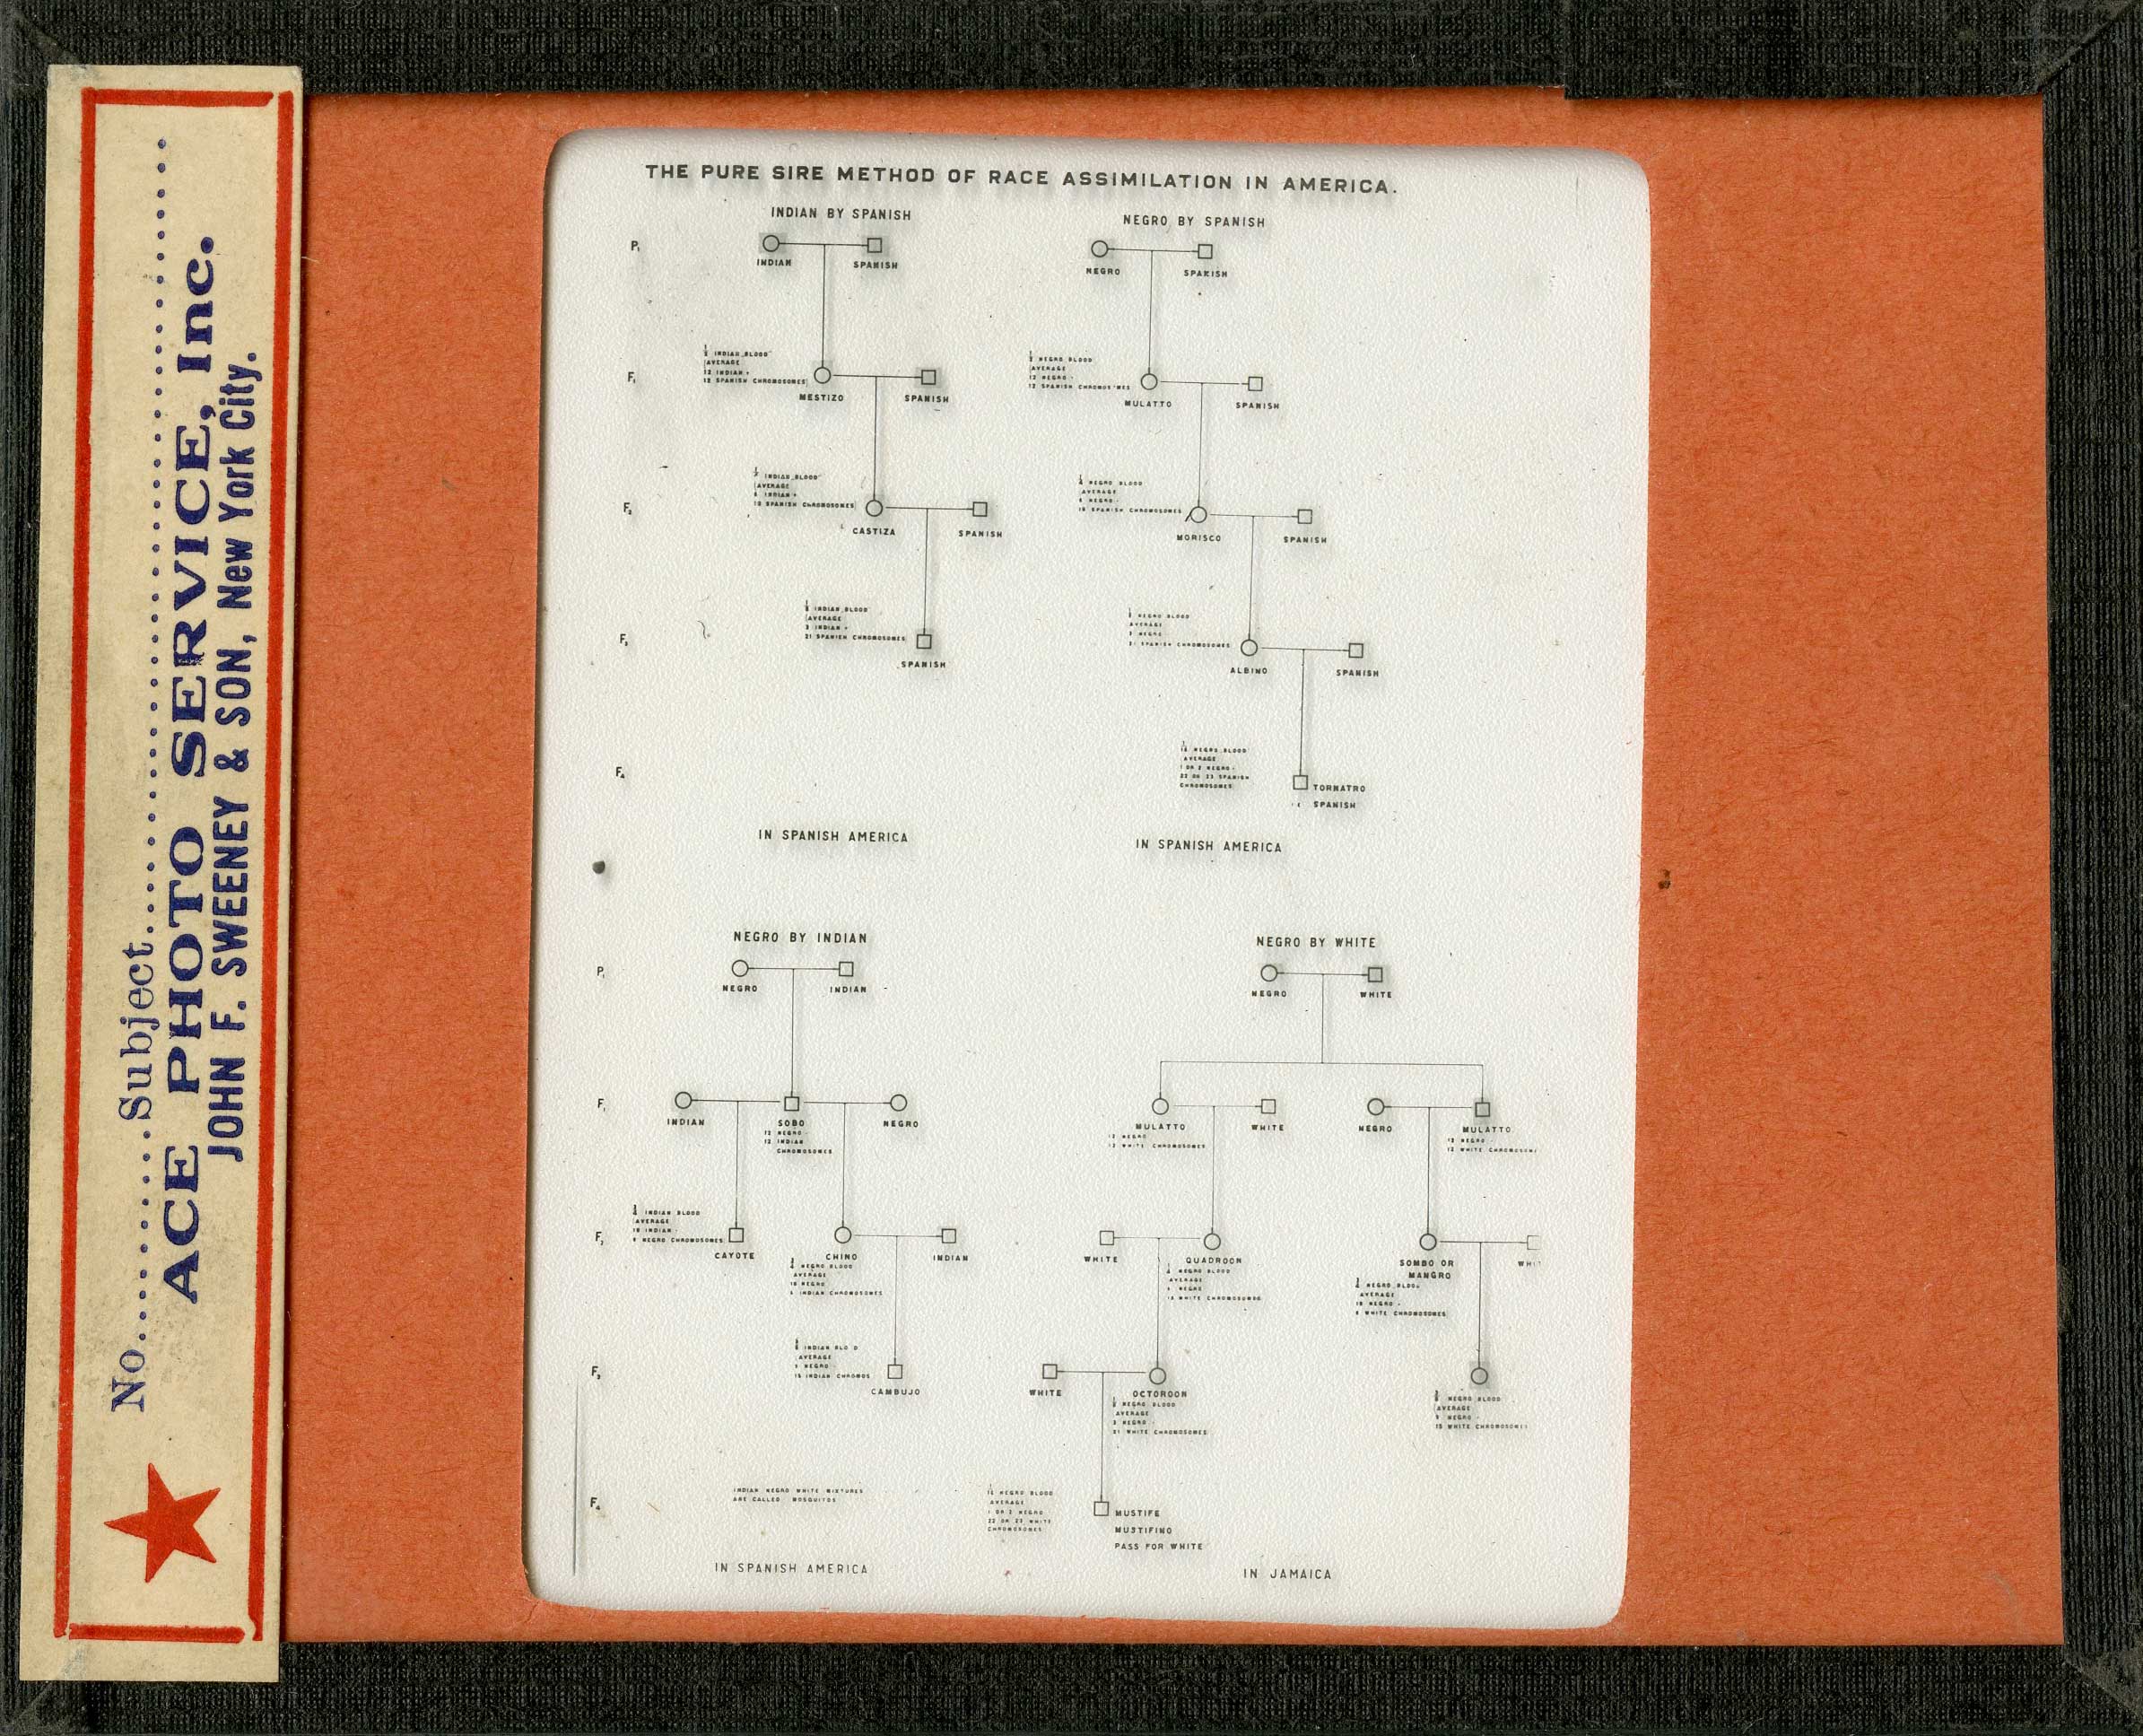 Four eugenics pedigree charts of race assimilation. The charts use lines and shapes to represent information. Squares represent males and circles represent females. Lines join parents and children.